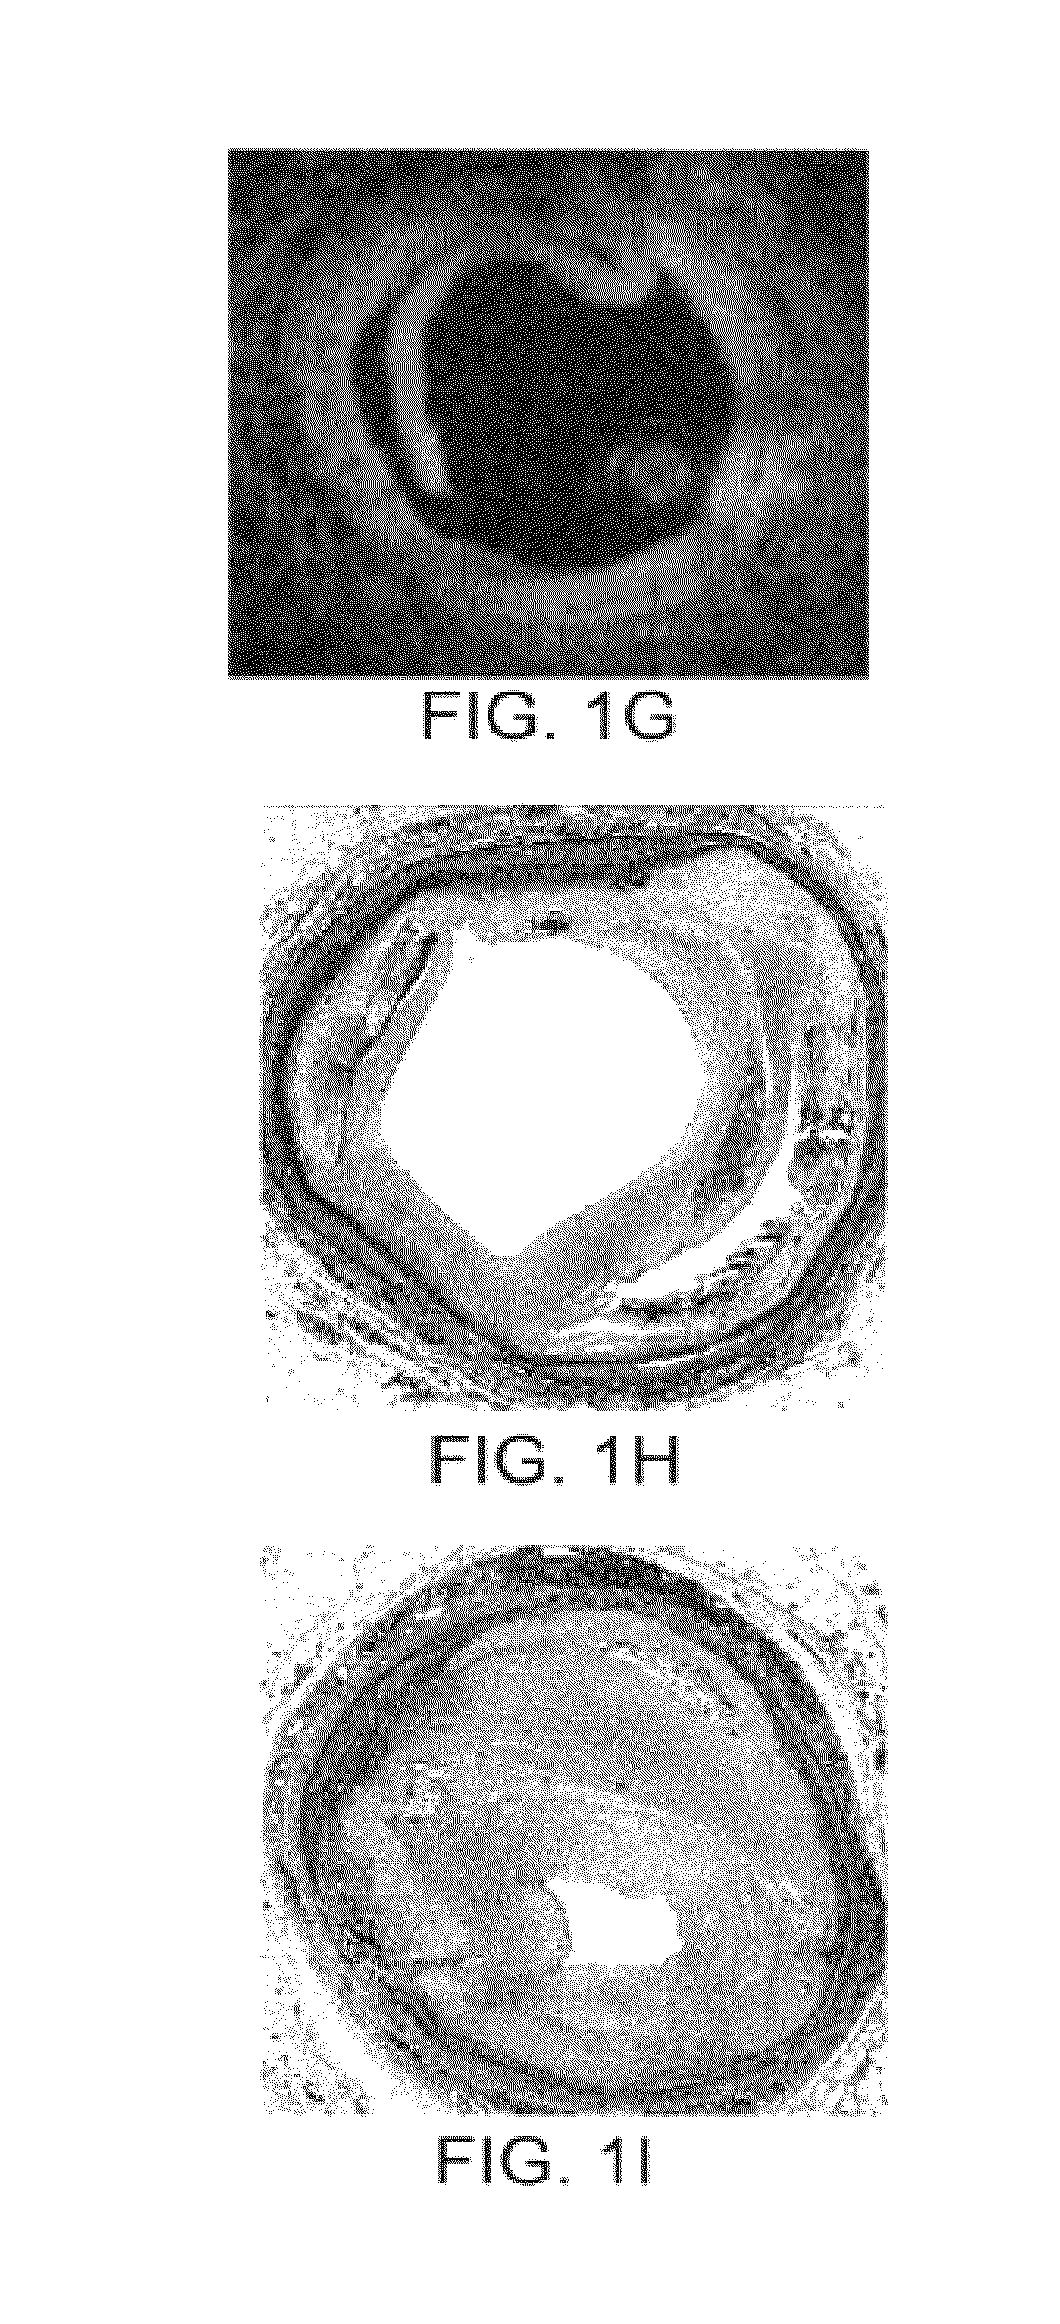 Apparatus and Method for Treatment of In-Stent Restenosis